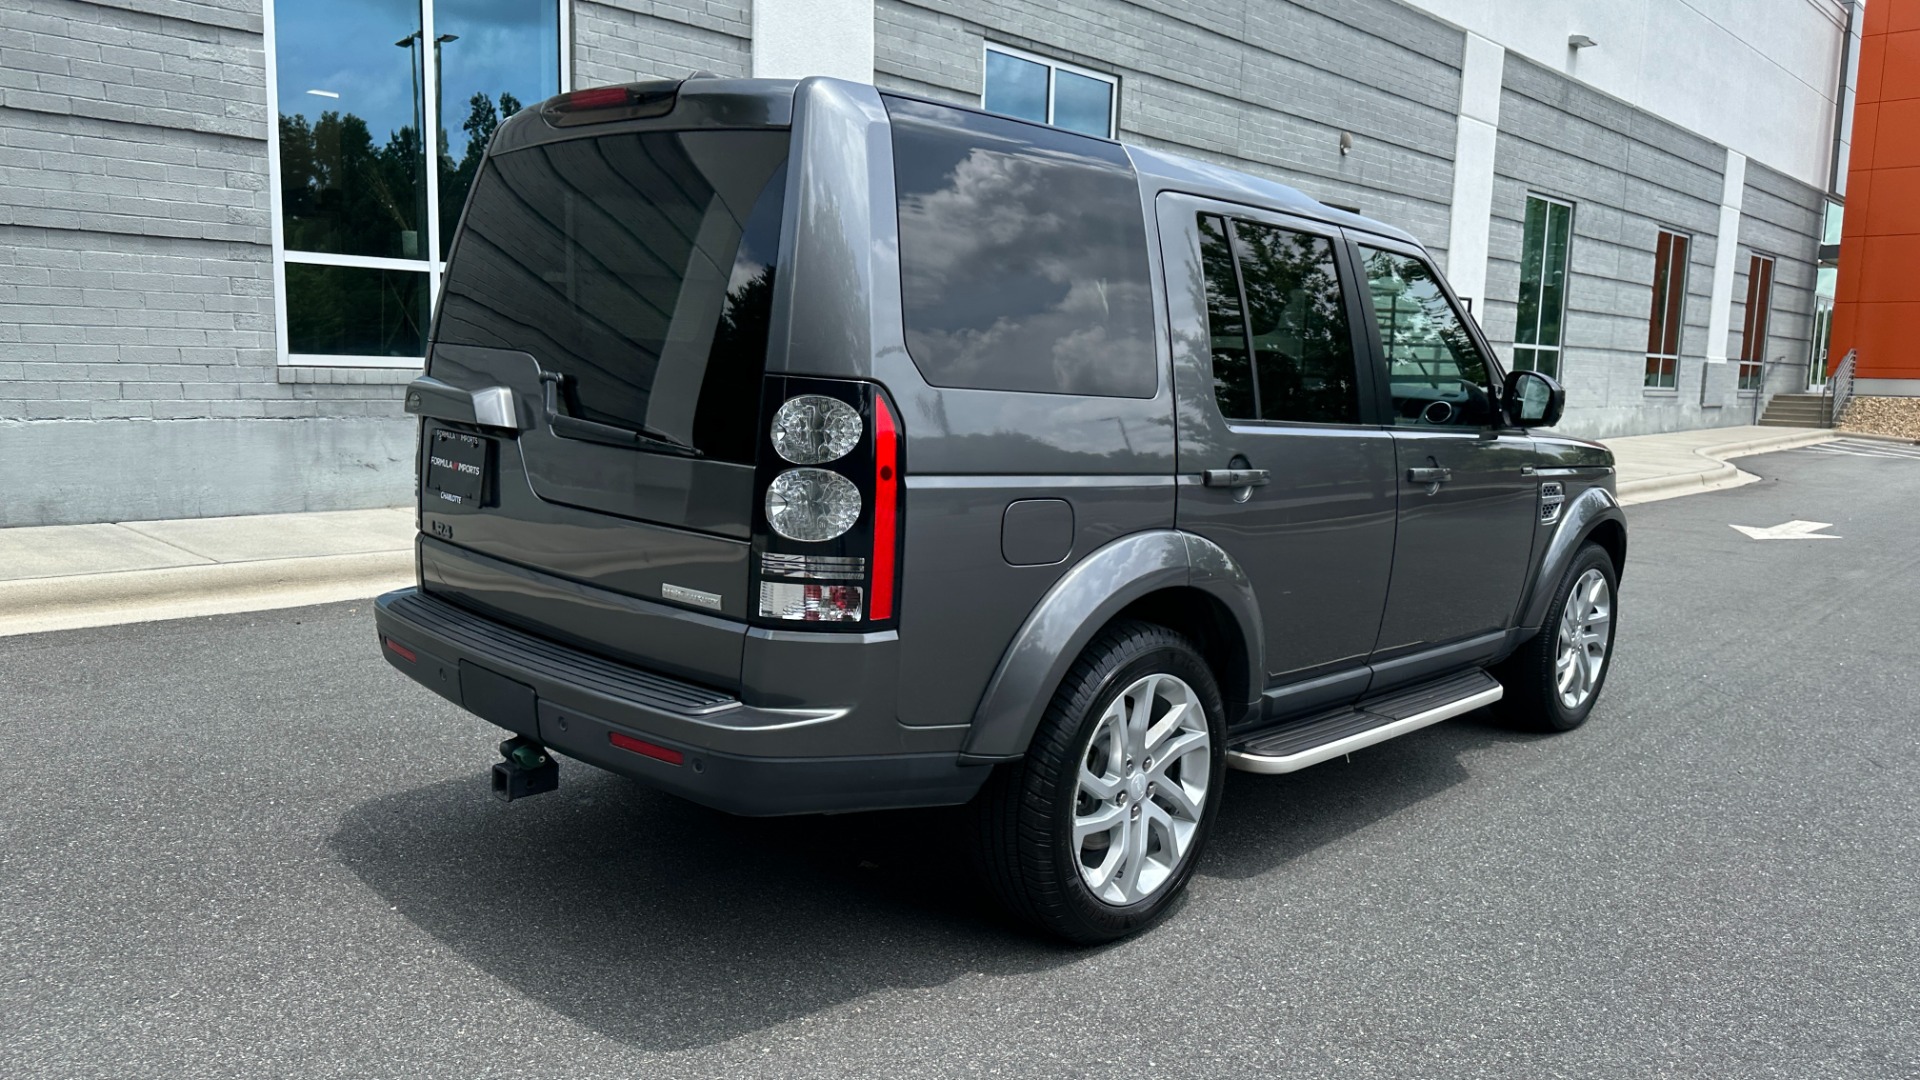 Used 2015 Land Rover LR4 LUX / VISION ASSIST / 20IN WHEELS / GLOSS BLACK TRIM / 3 ROW SEATING for sale $22,500 at Formula Imports in Charlotte NC 28227 7